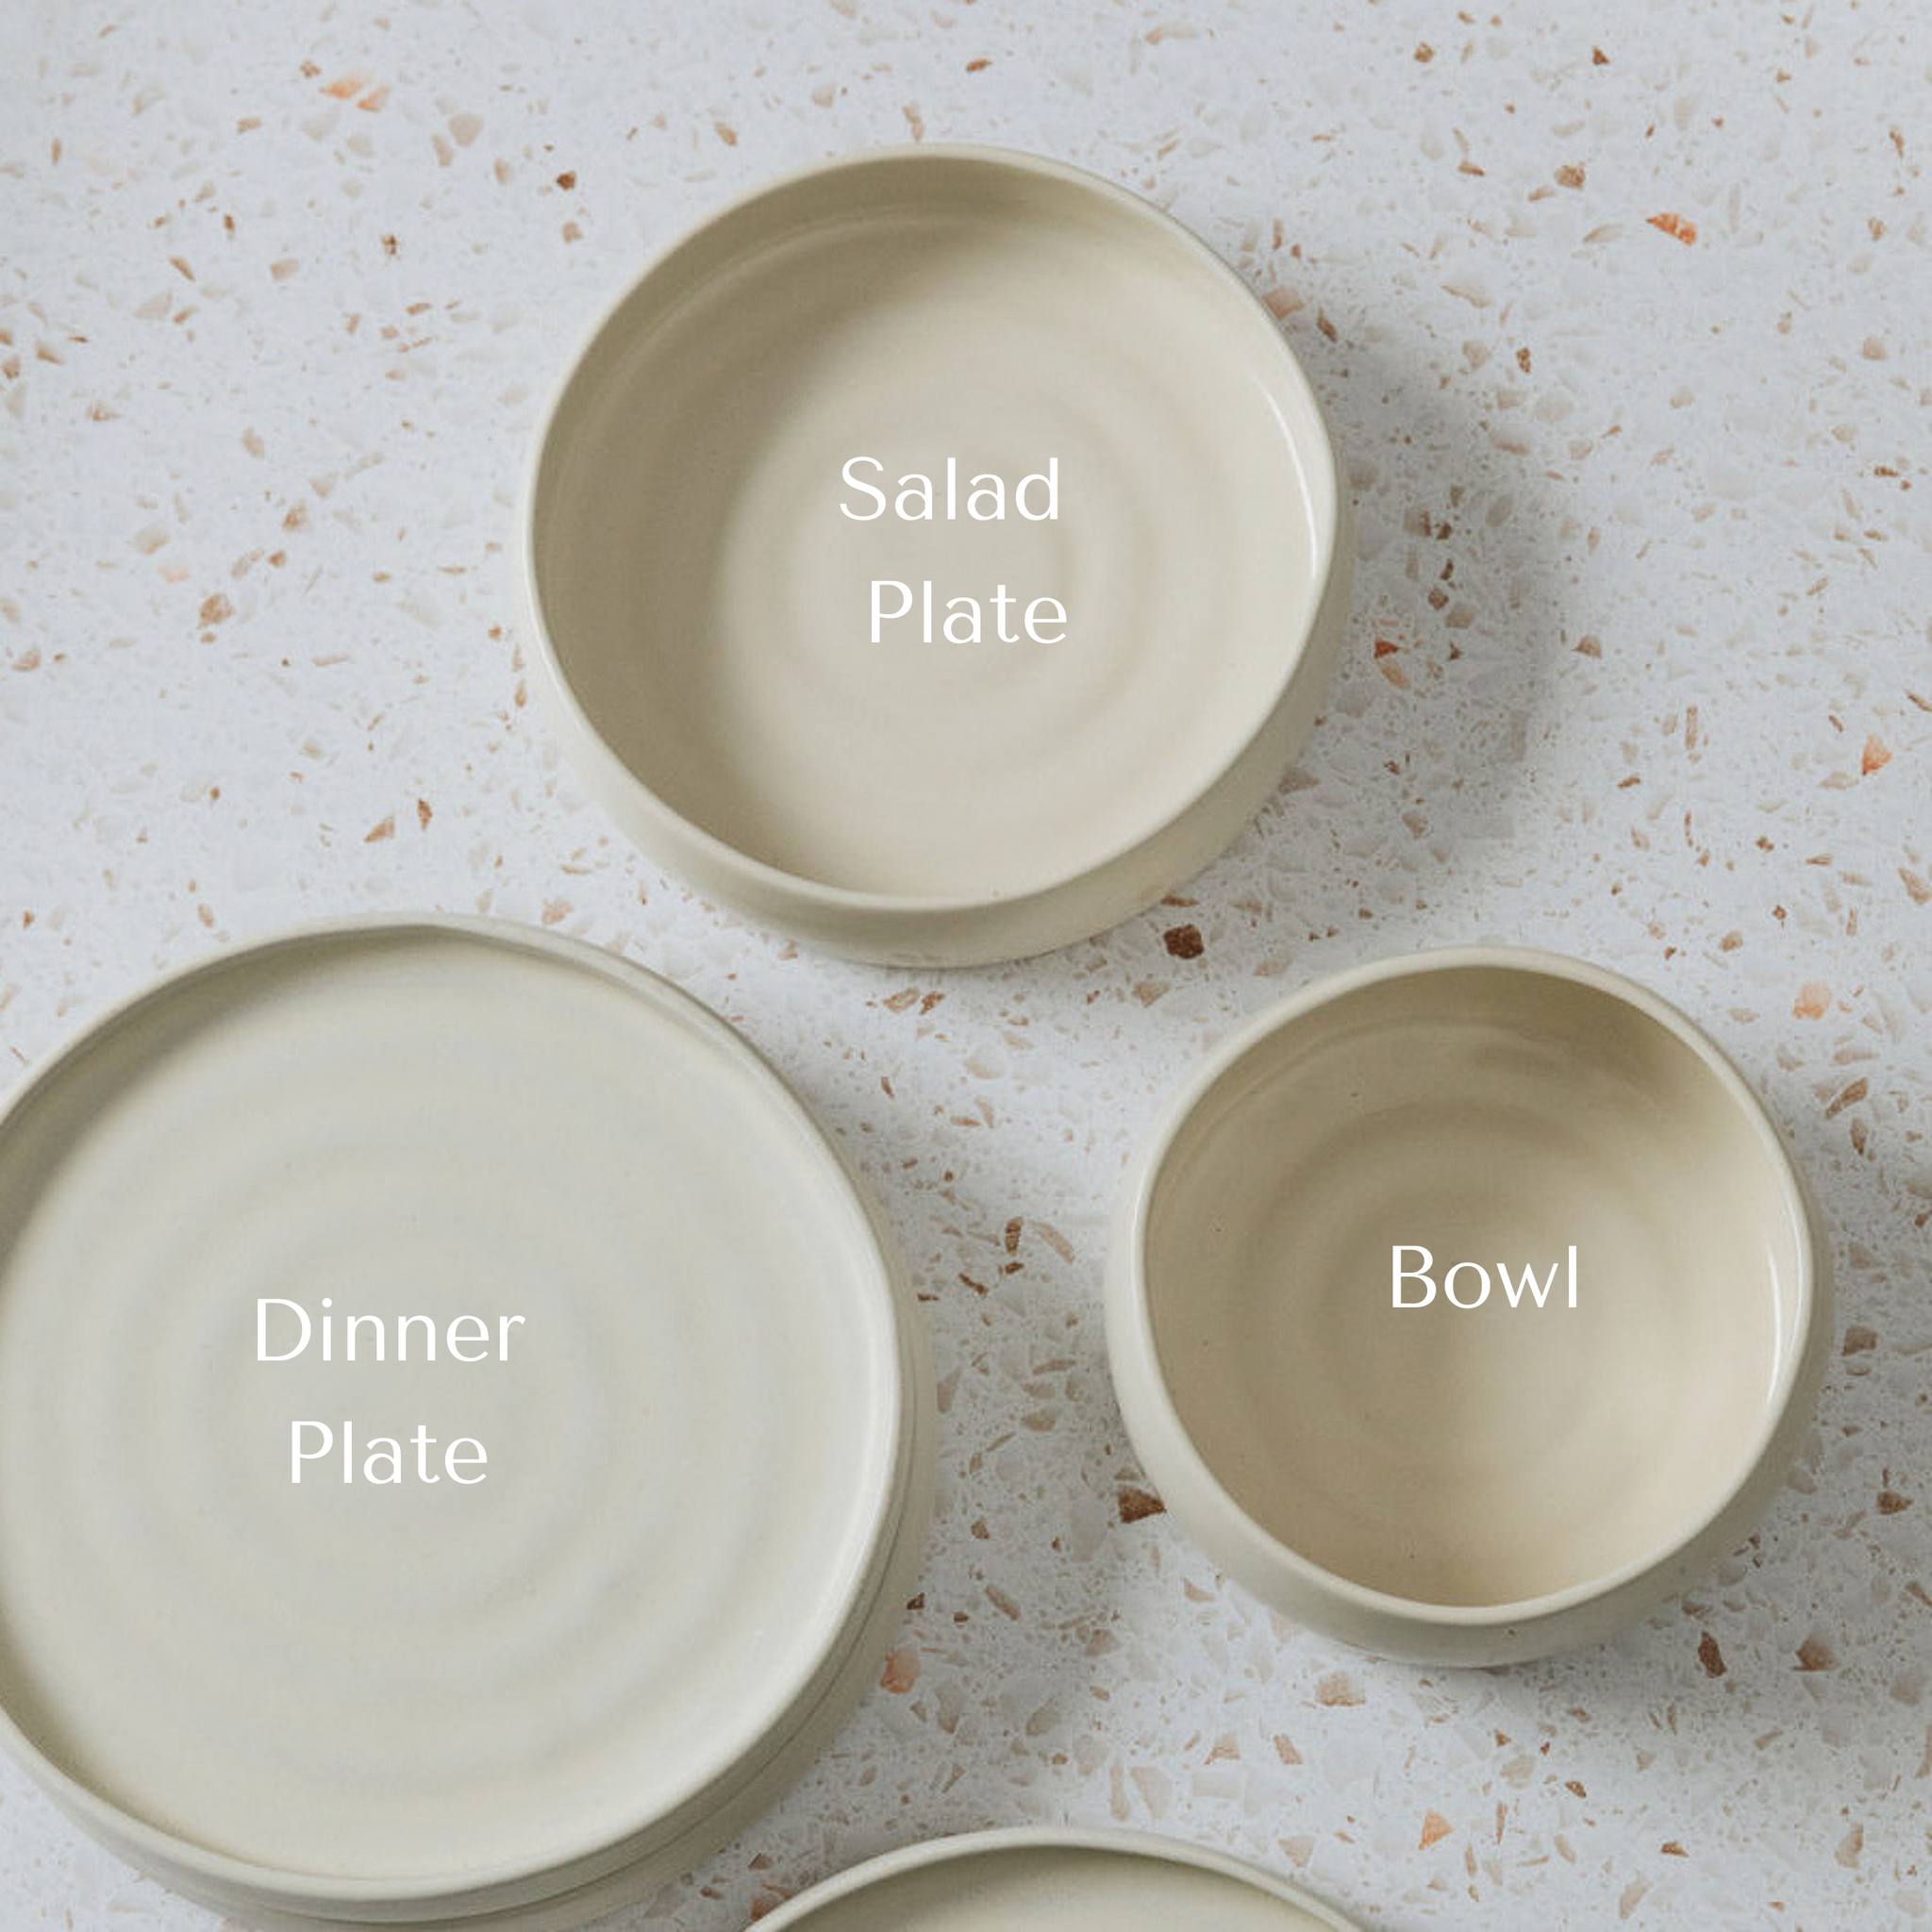 A set of ceramic dishes including a salad plate, dinner plate and bowl.